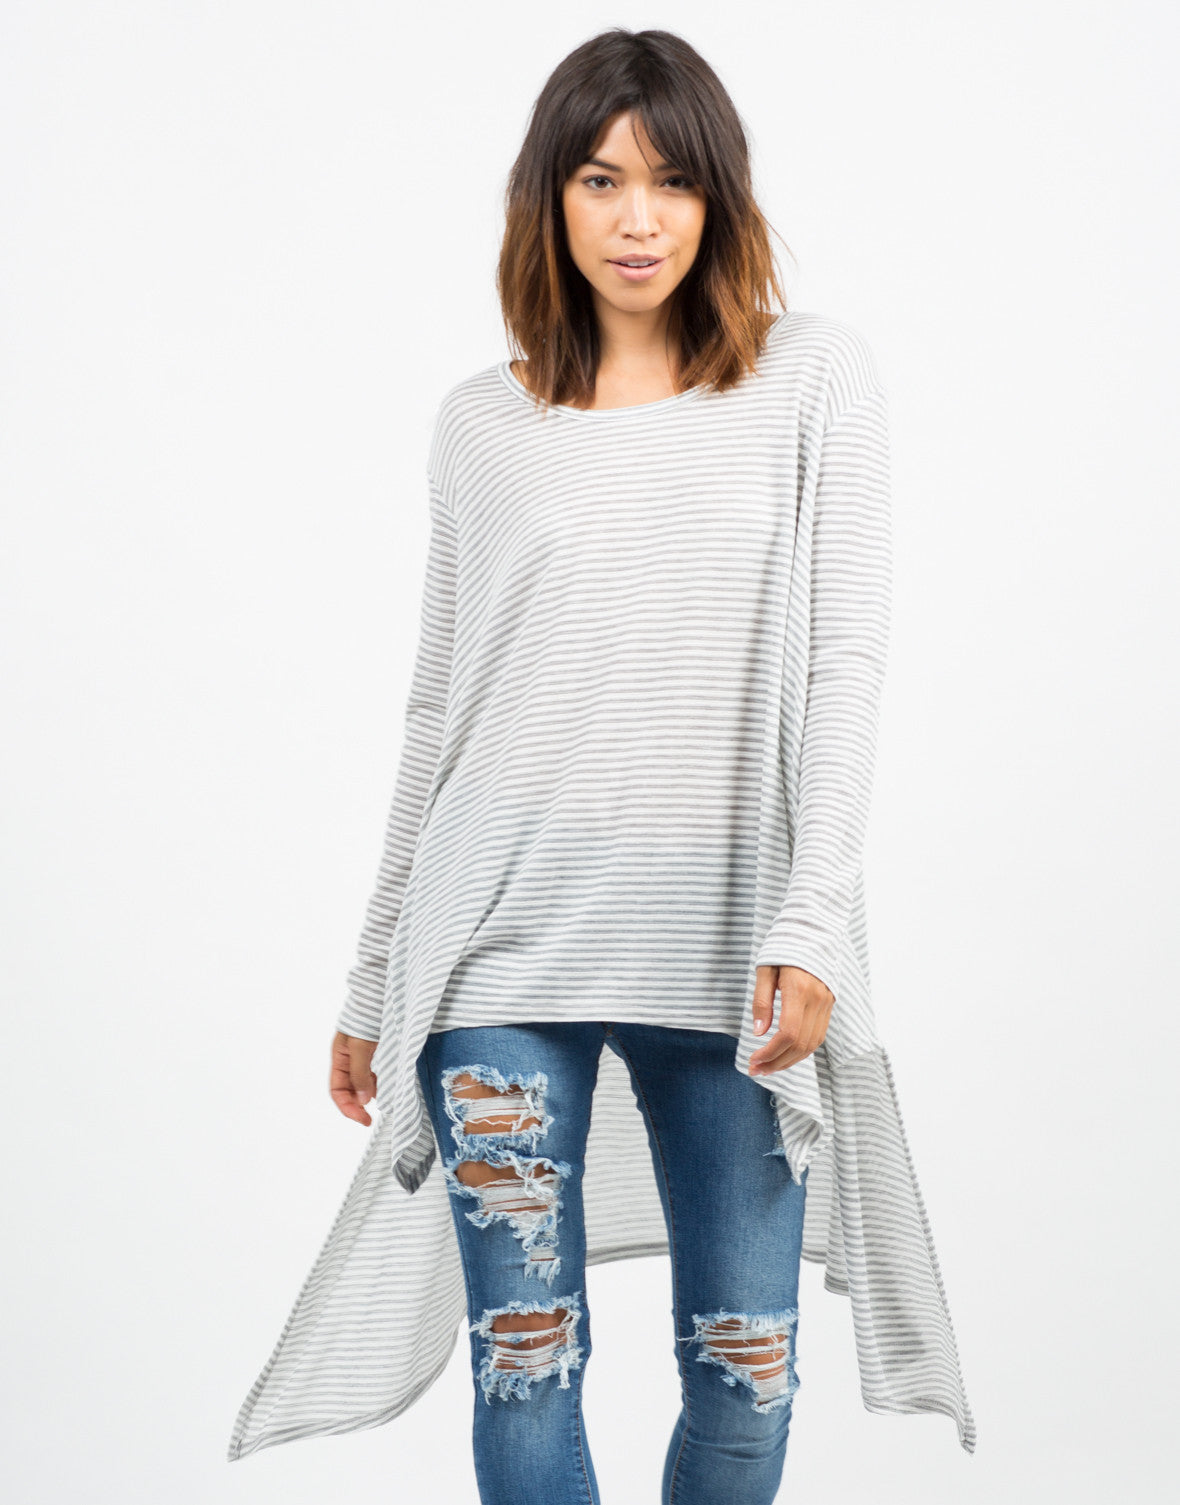 Oversized Asymmetrical Striped Top - Grey Top - Lightweight Top – 2020AVE